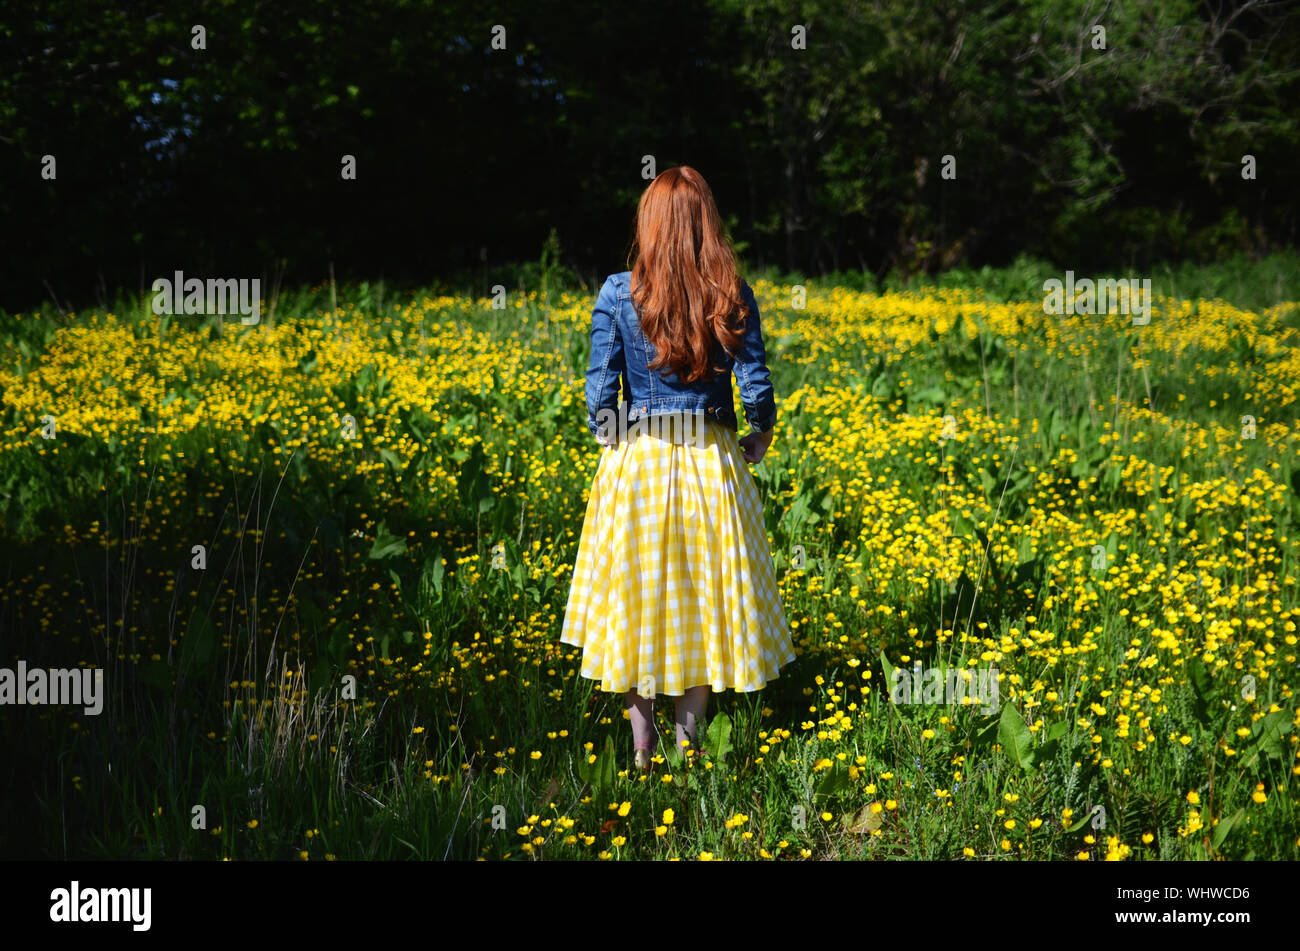 Rear View Of A Red Haired Young Woman On Flower Meadow Stock Photo